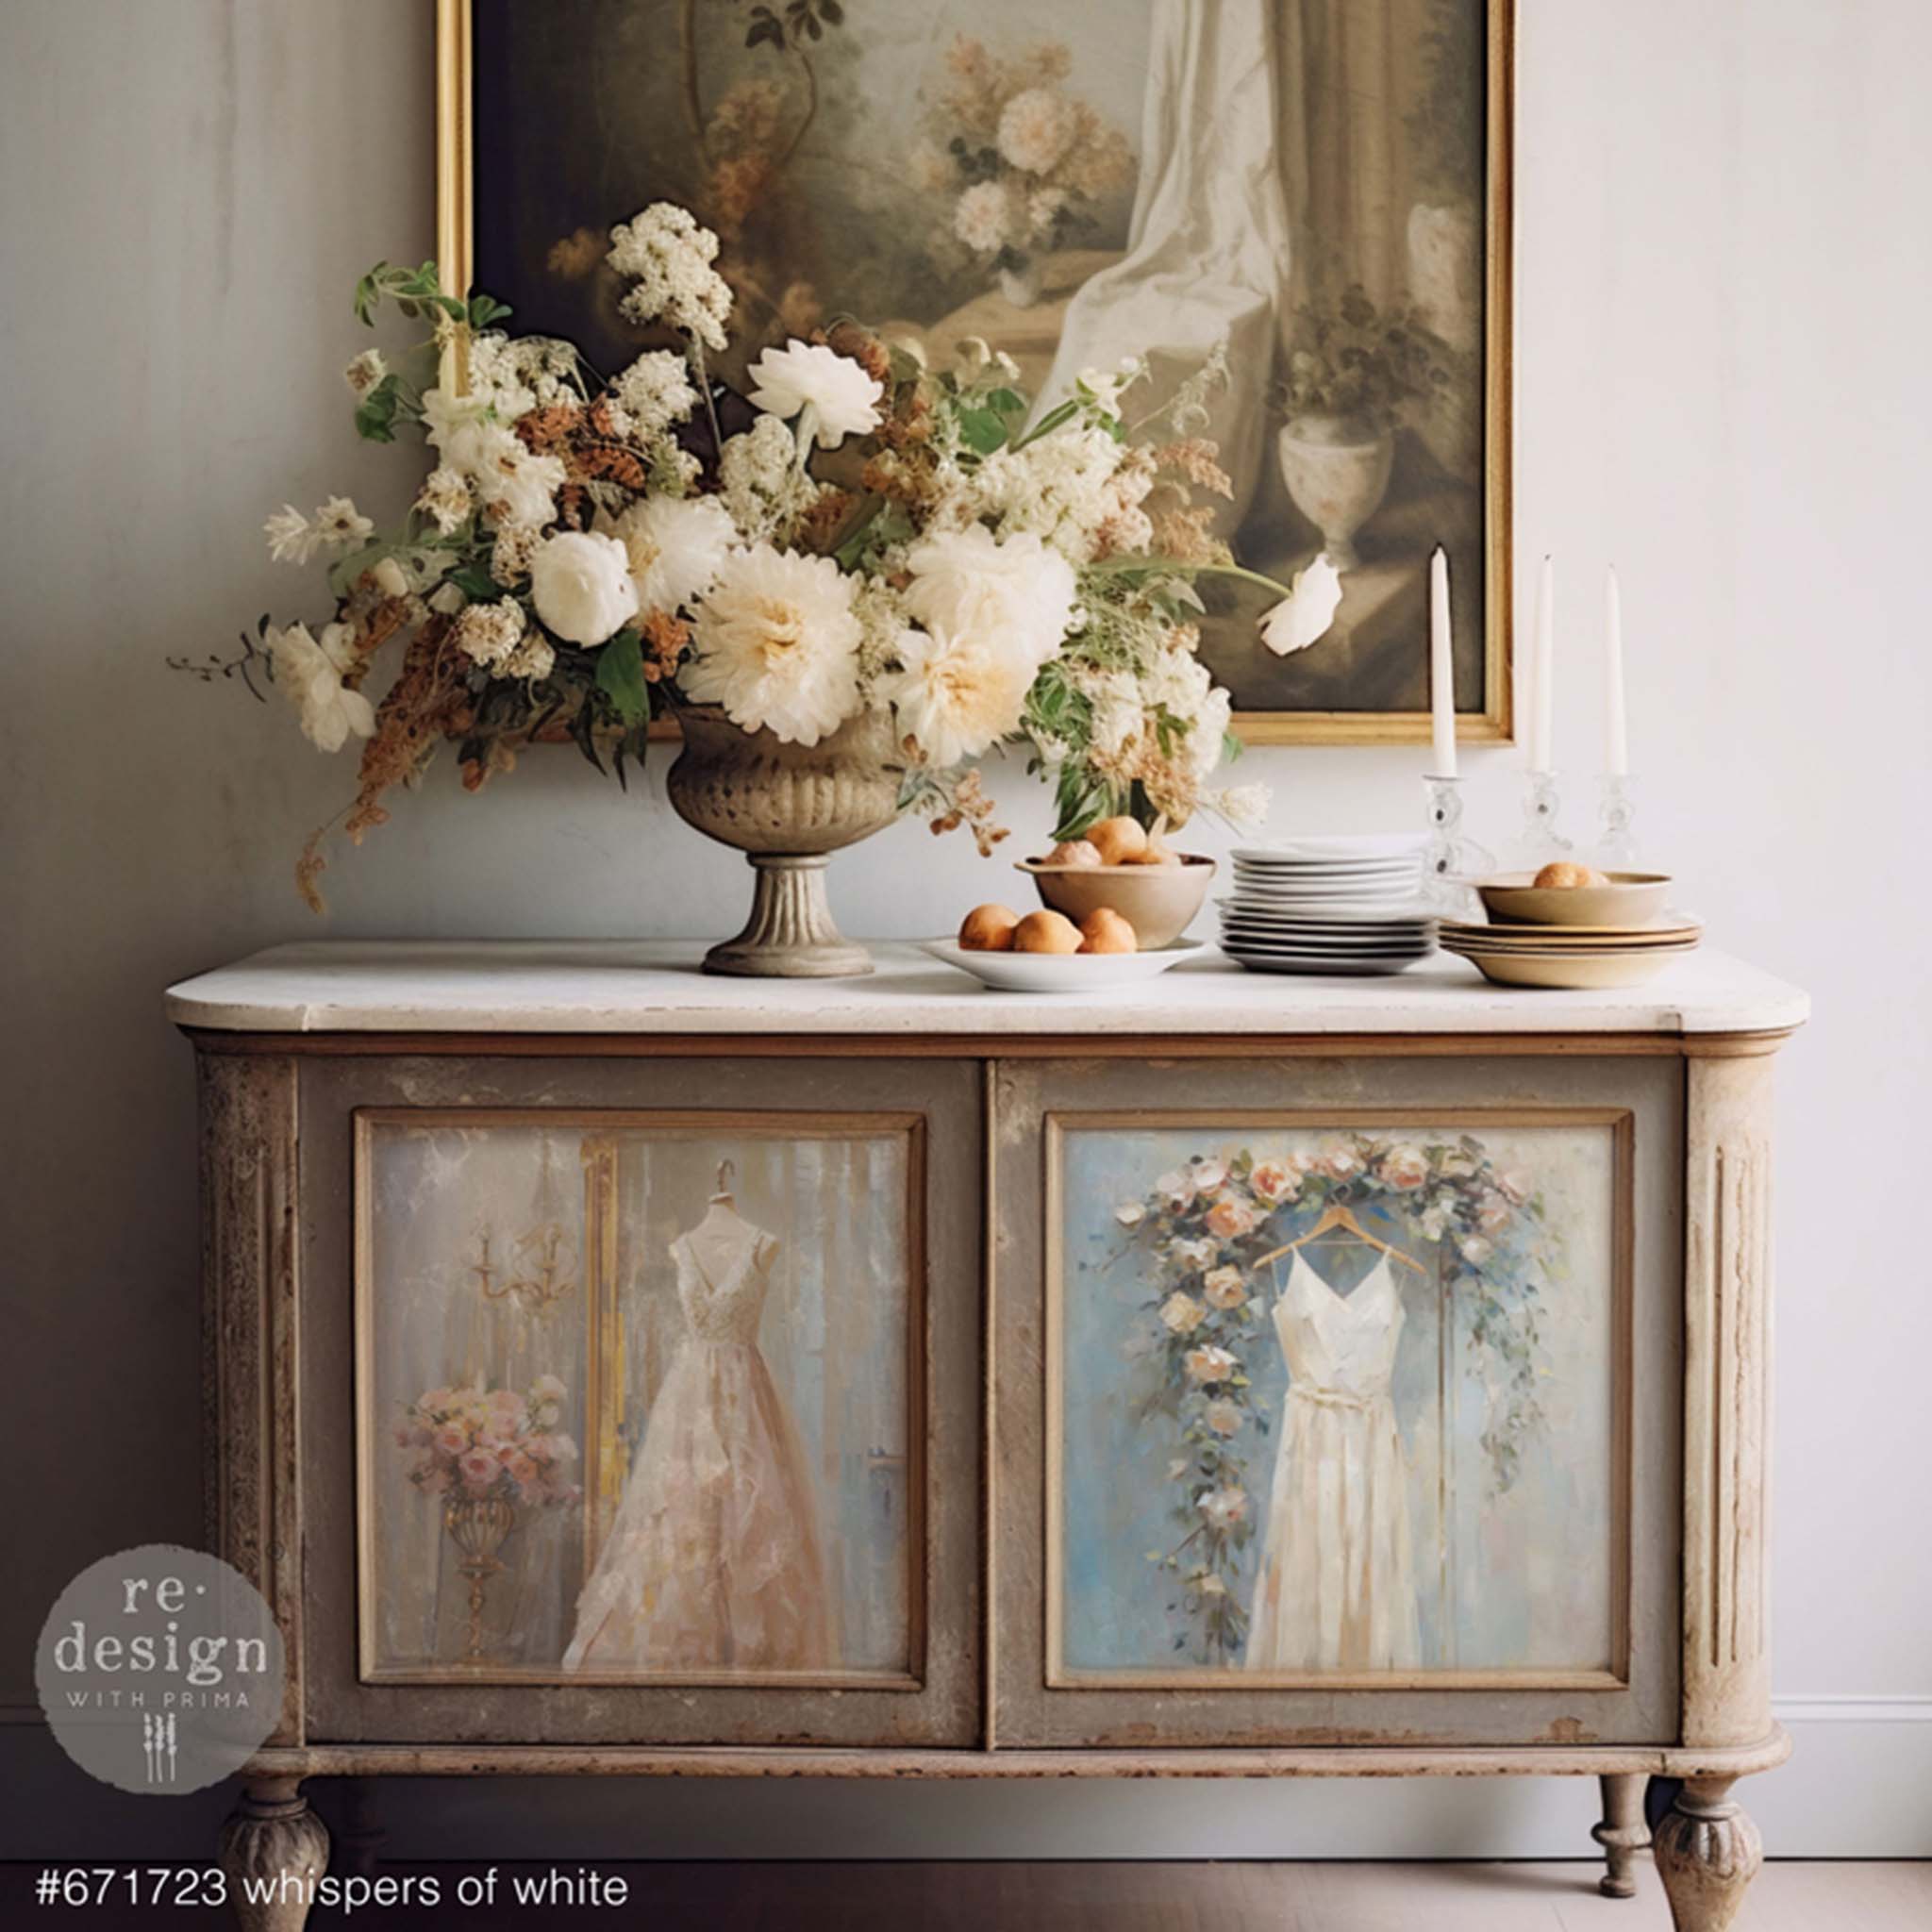 A vintage console table is painted beige and features ReDesign with Prima's Whispers of White tissue paper on its 2 doors. A large bouquet of flowers and dinnerware sit on the table.